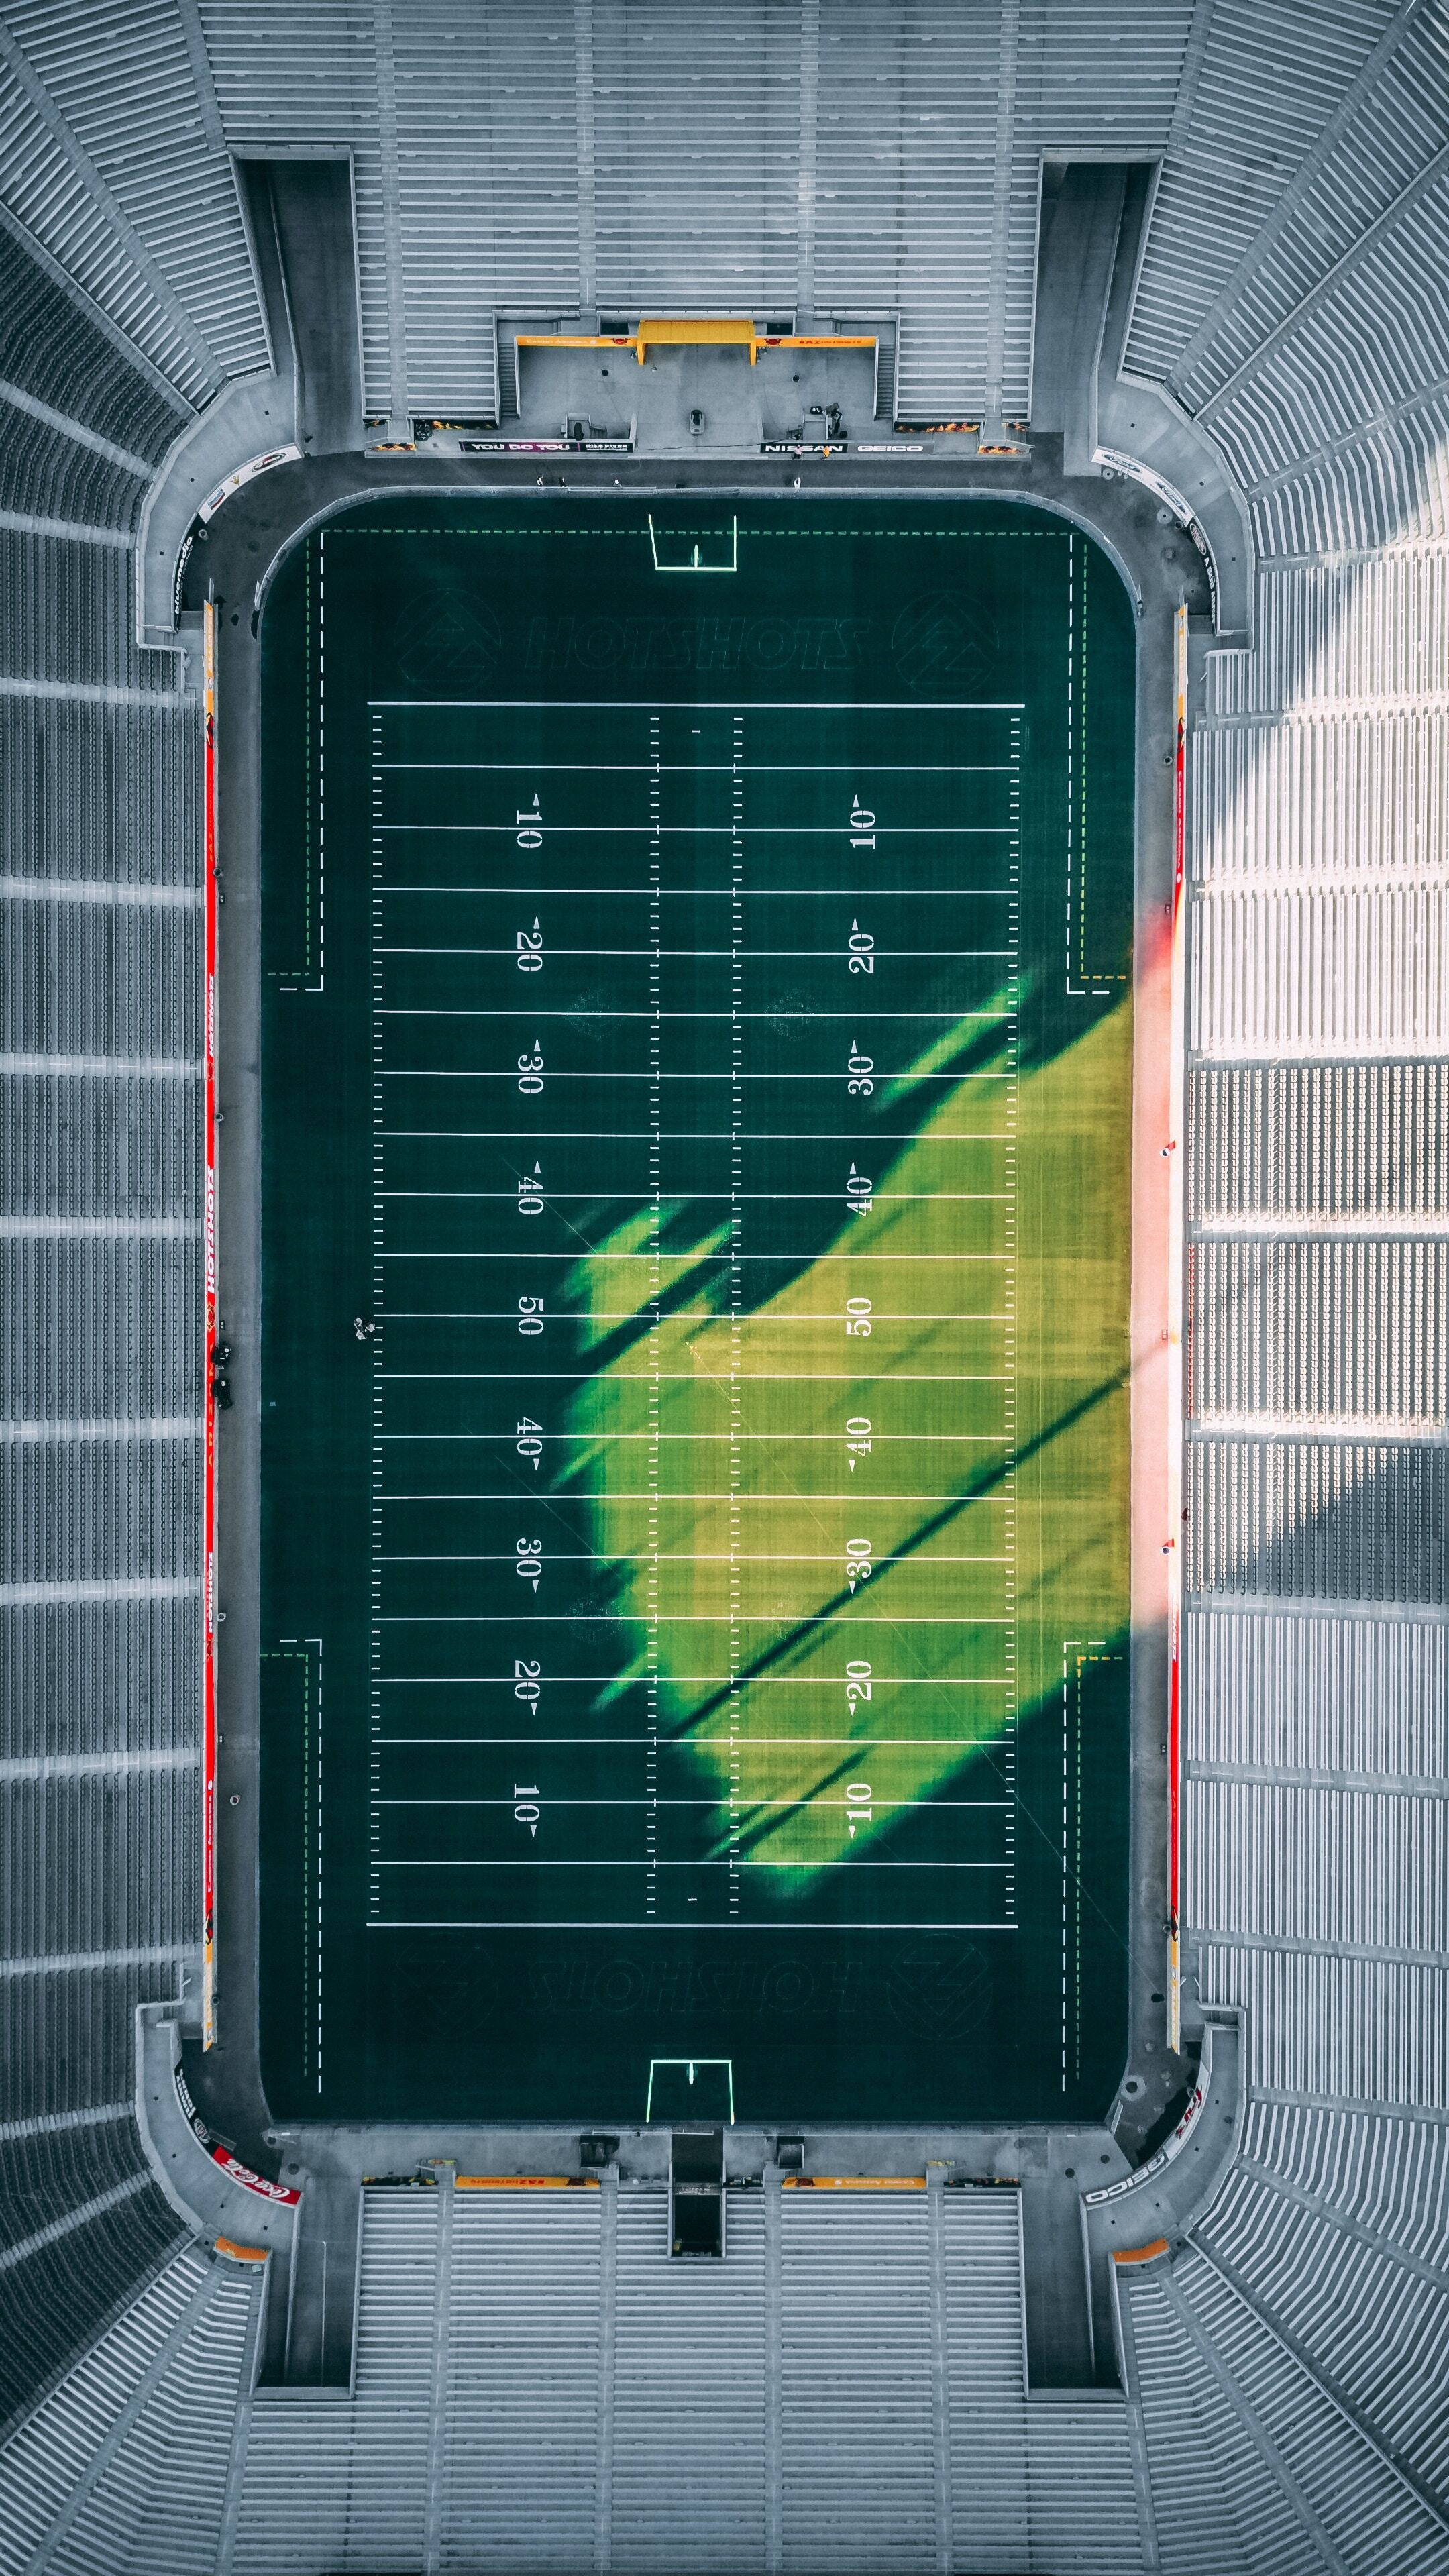 An aerial view of a football field